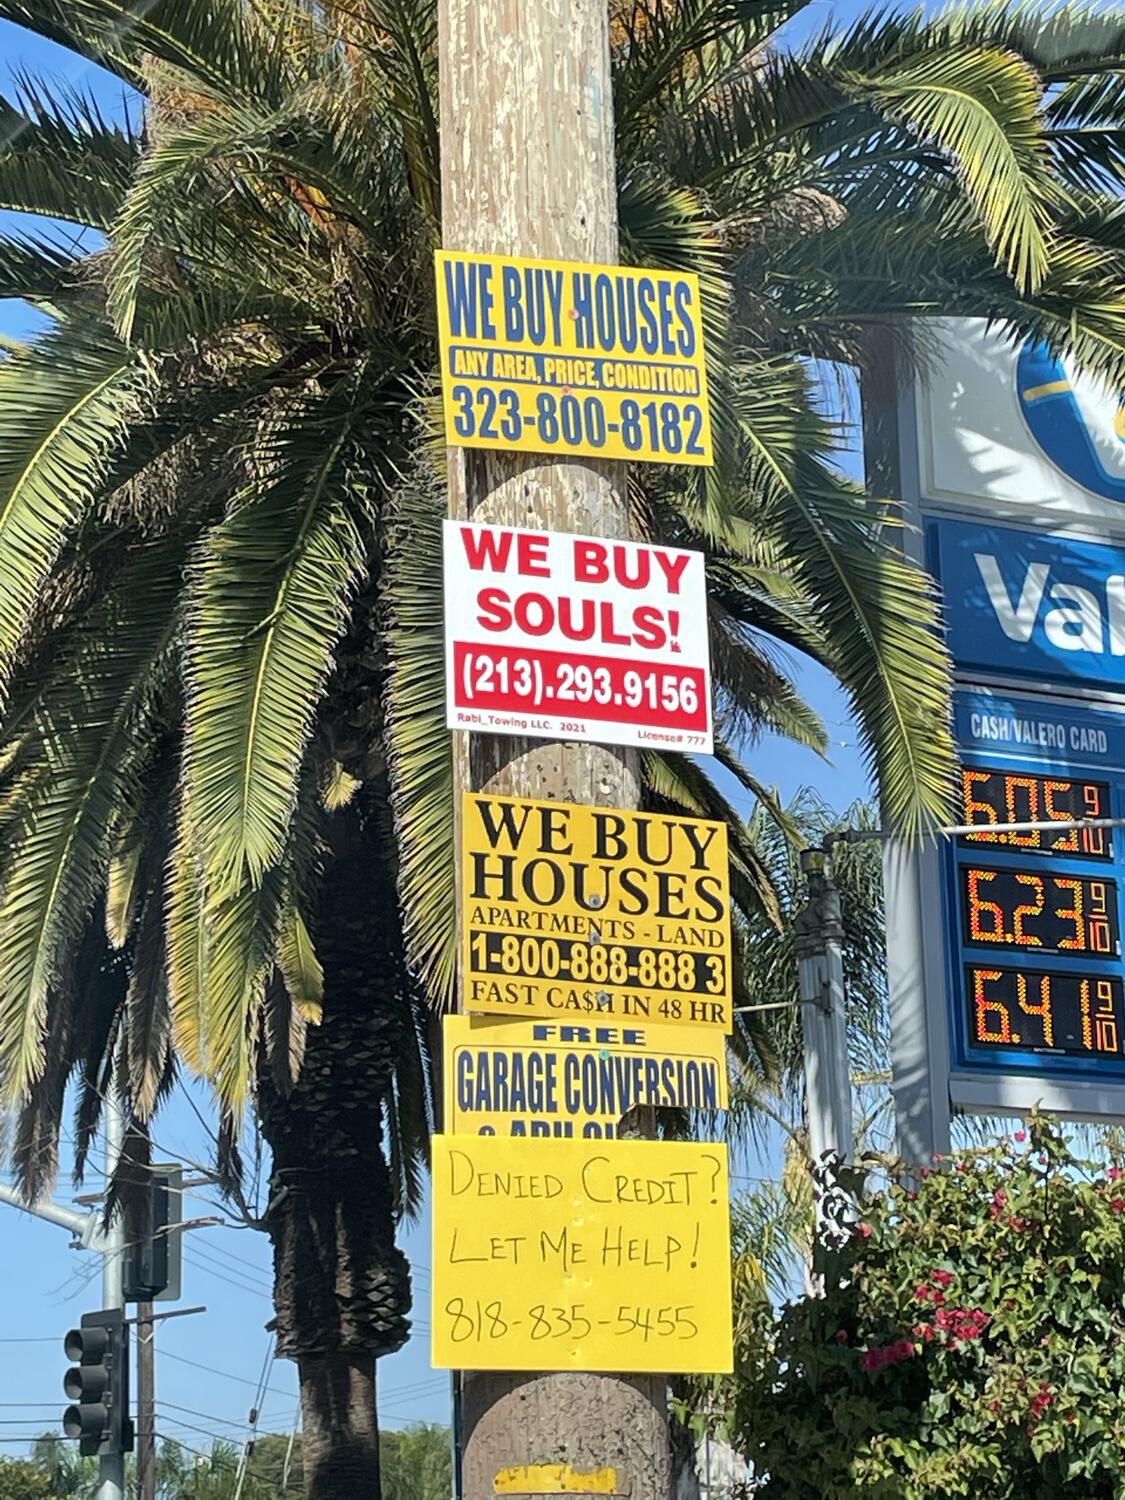 Signs posted on a telephone pole: "We buy houses" "We buy souls!" "We buy houses" "Free garage conversion" "Denied credit? Let me help!"